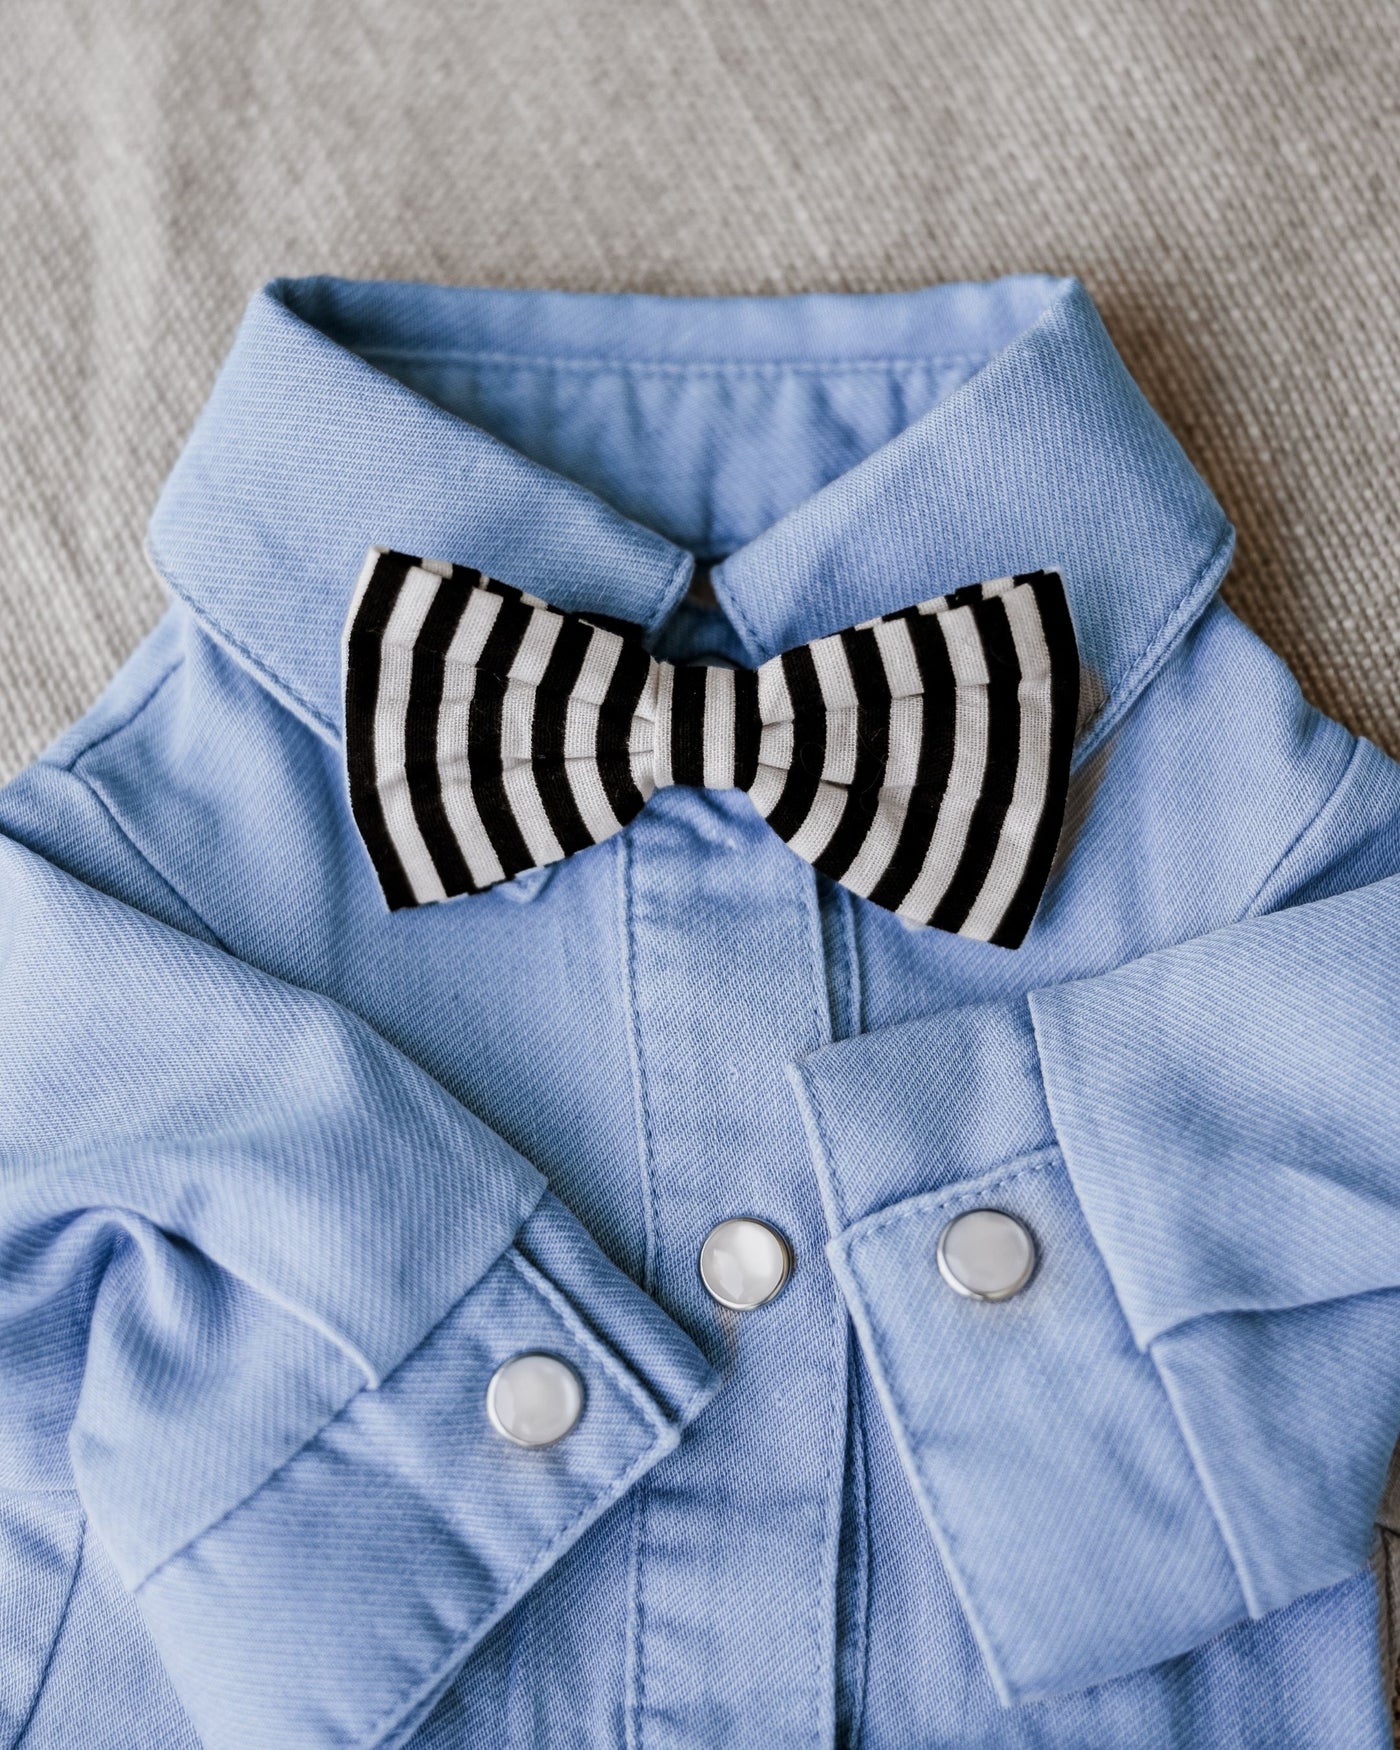 Captain Black + White Striped Bow Tie Product Image Detail